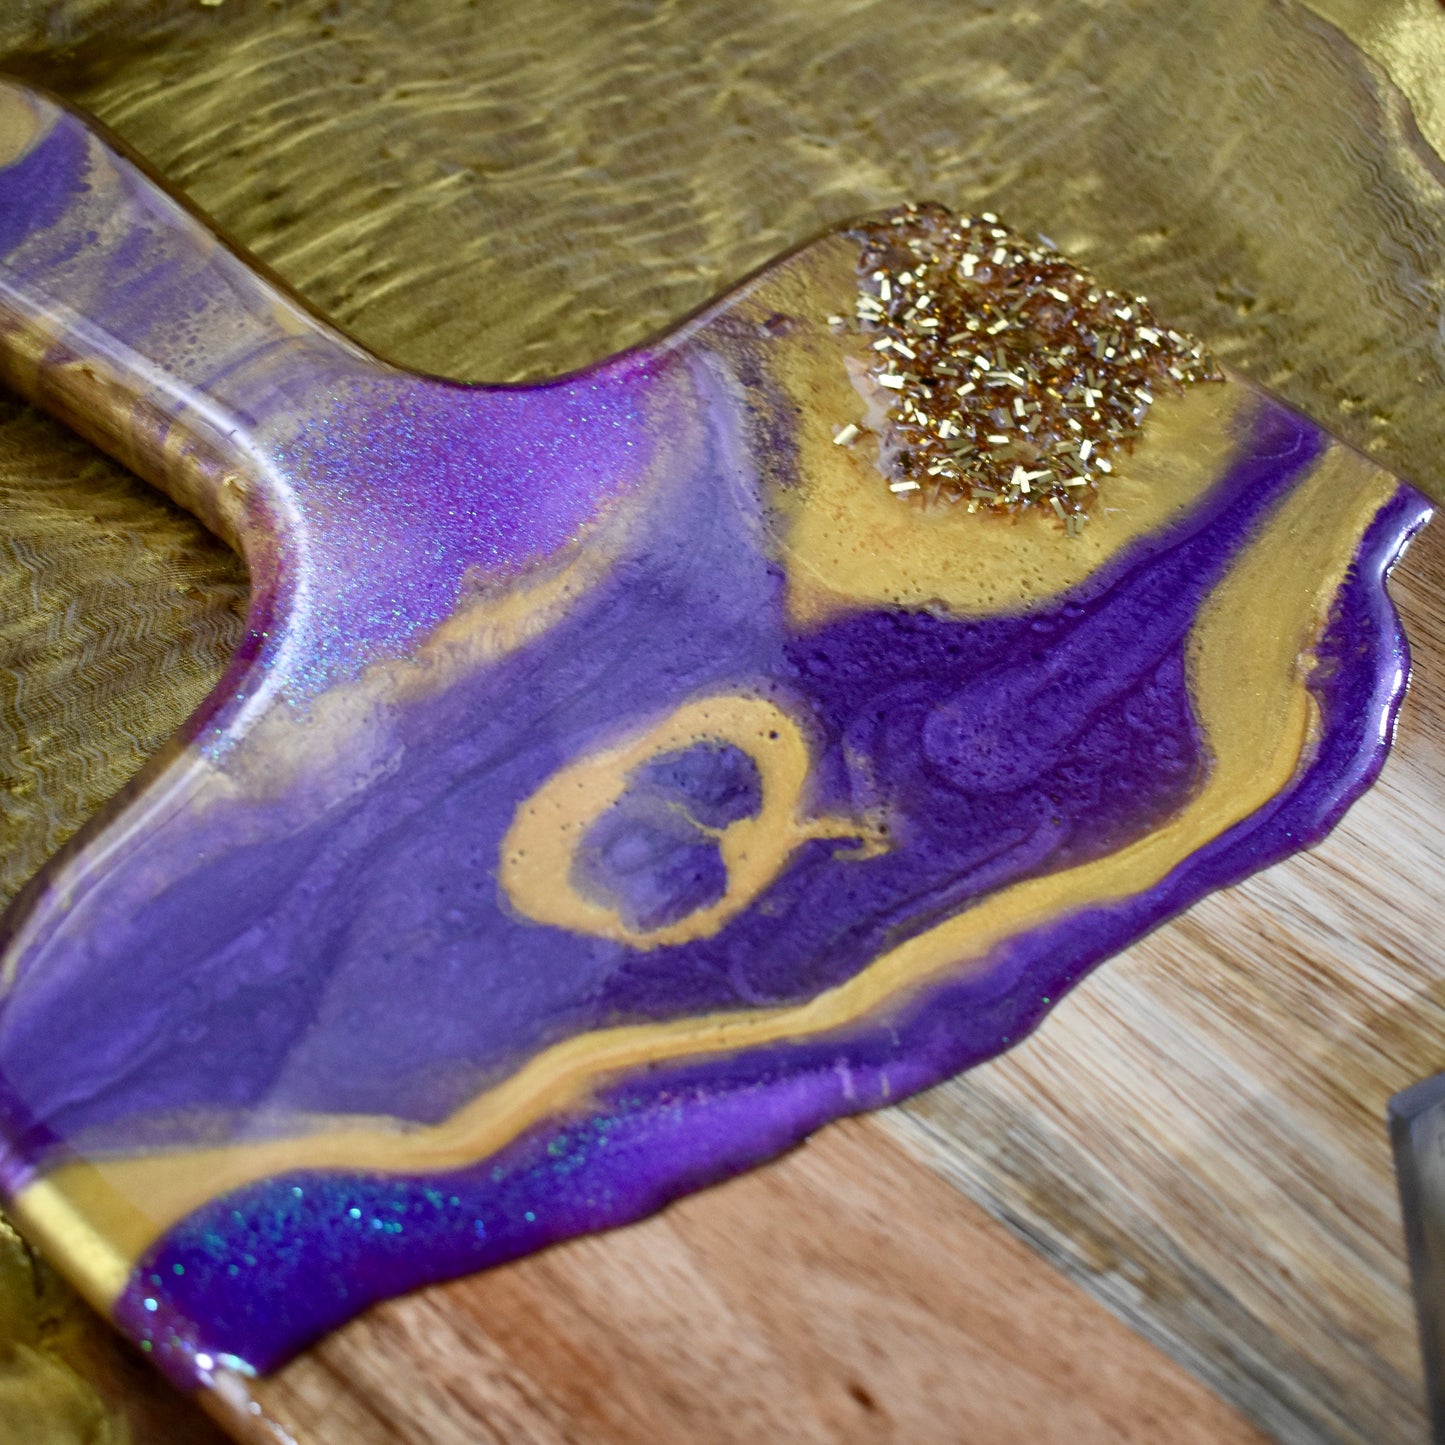 Purple & Gold Cheese Board Set - Fraternity Gift - Cheese Board Paddle - Charcuterie Gift Set – Wooden Cutting Board - Housewarming Gift